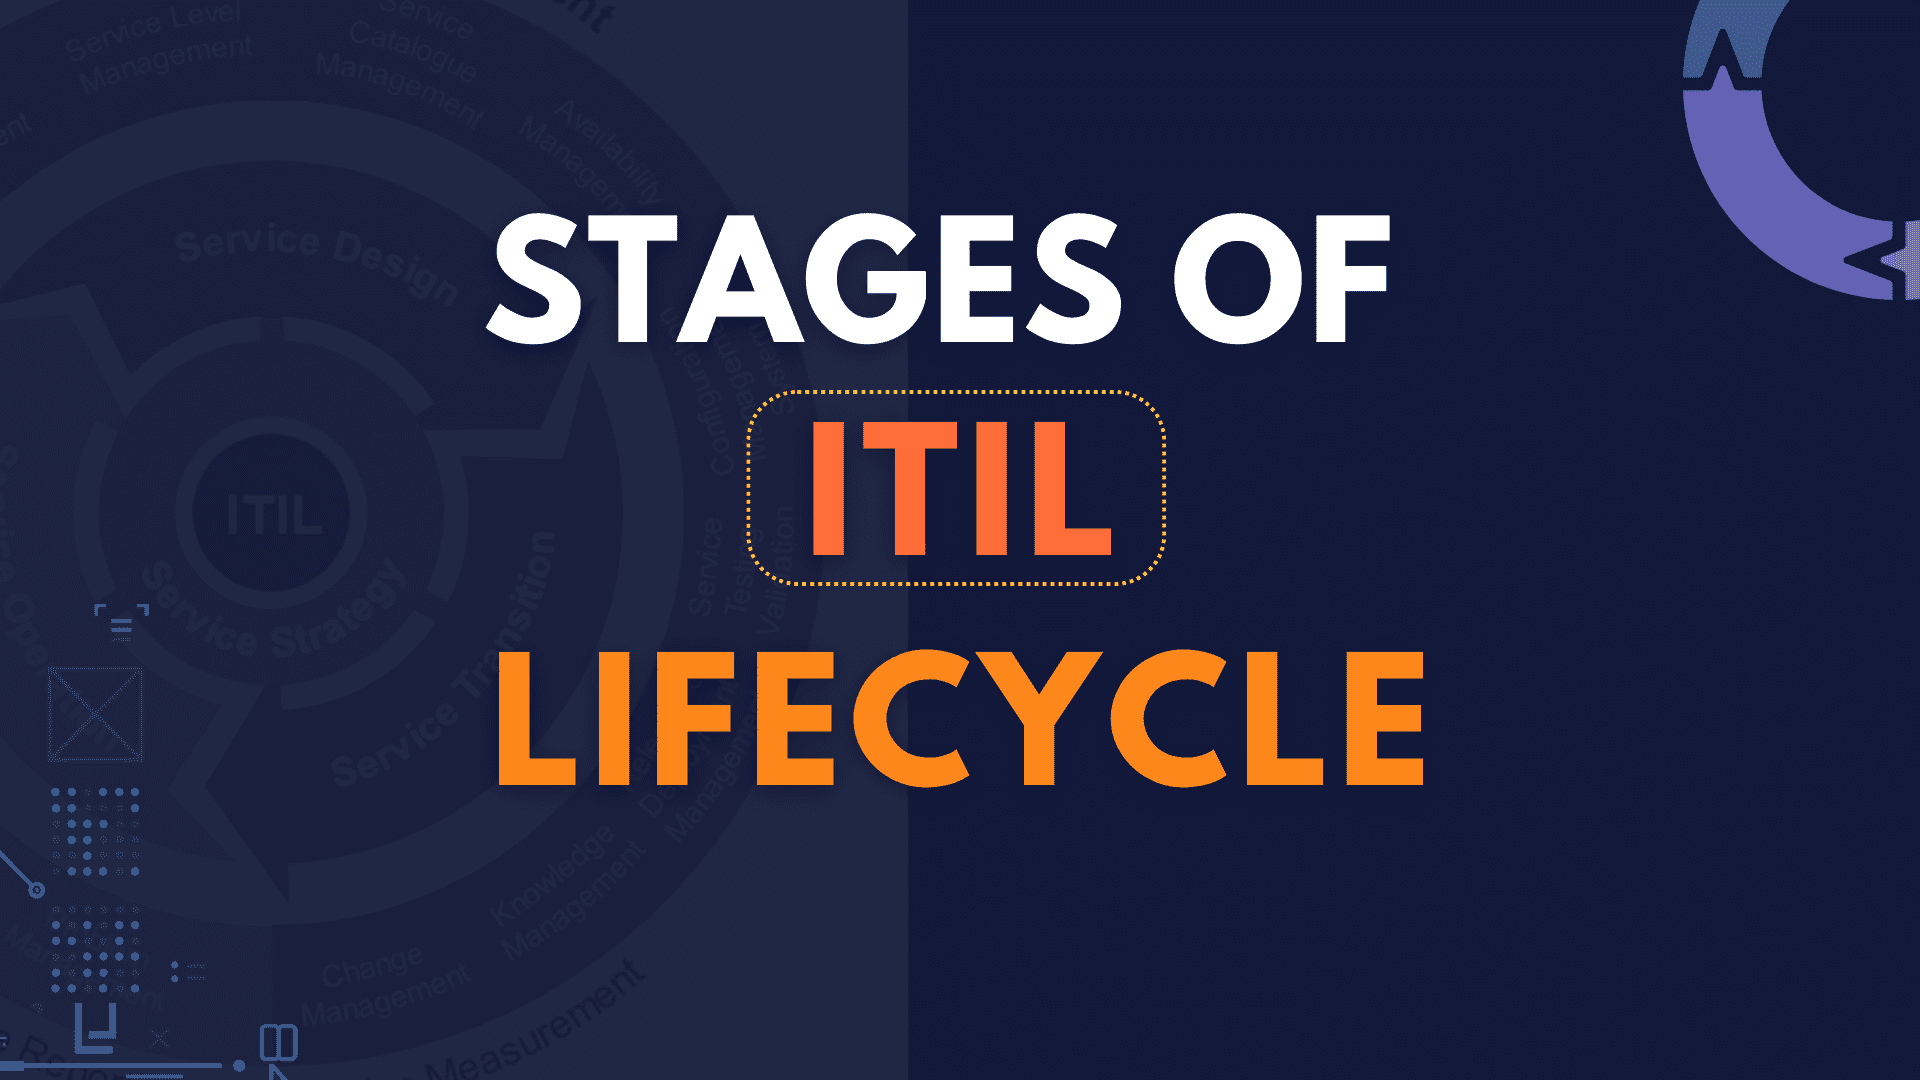 5-stages-of-itil-service-lifecycle-pm-study-circle